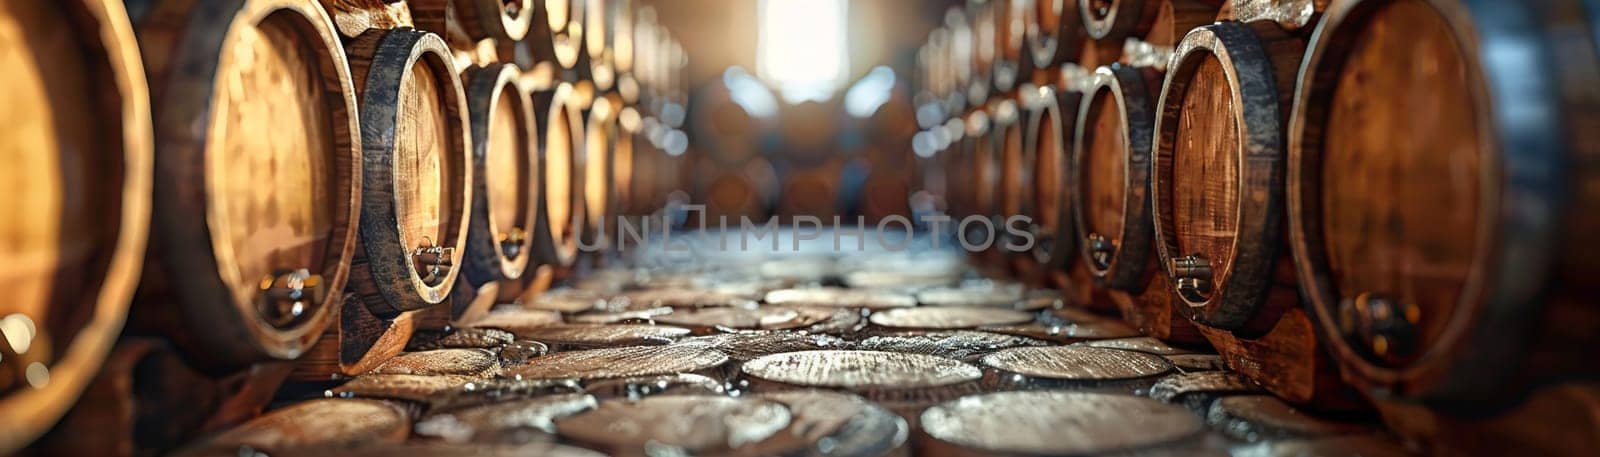 Vintage Winemaking Cellar with Barrels in Soft Focus by Benzoix